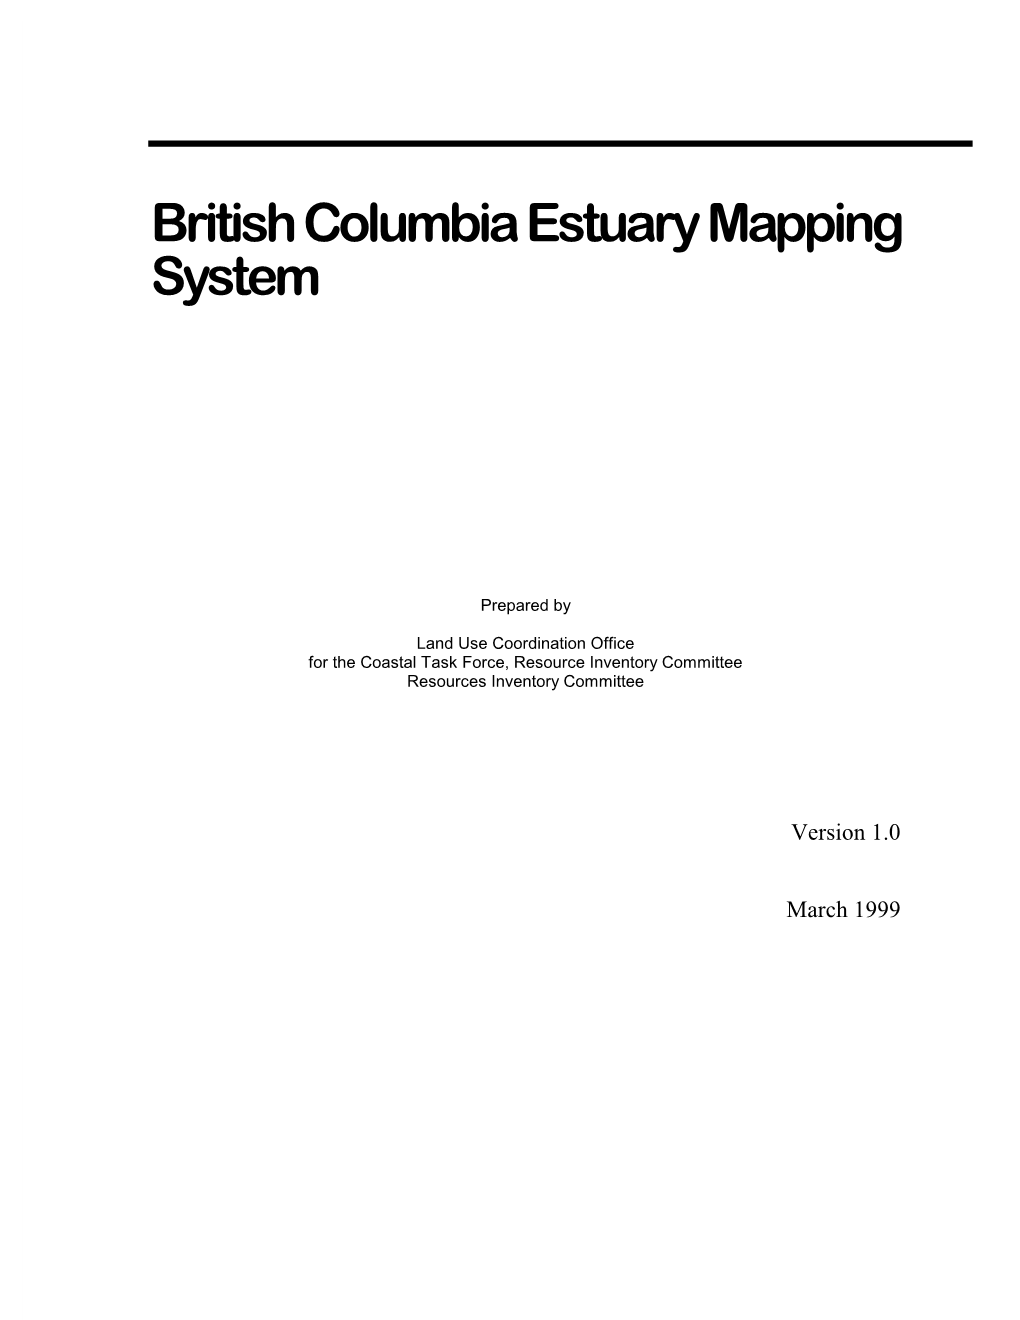 Estuary Mapping System [Computer File]